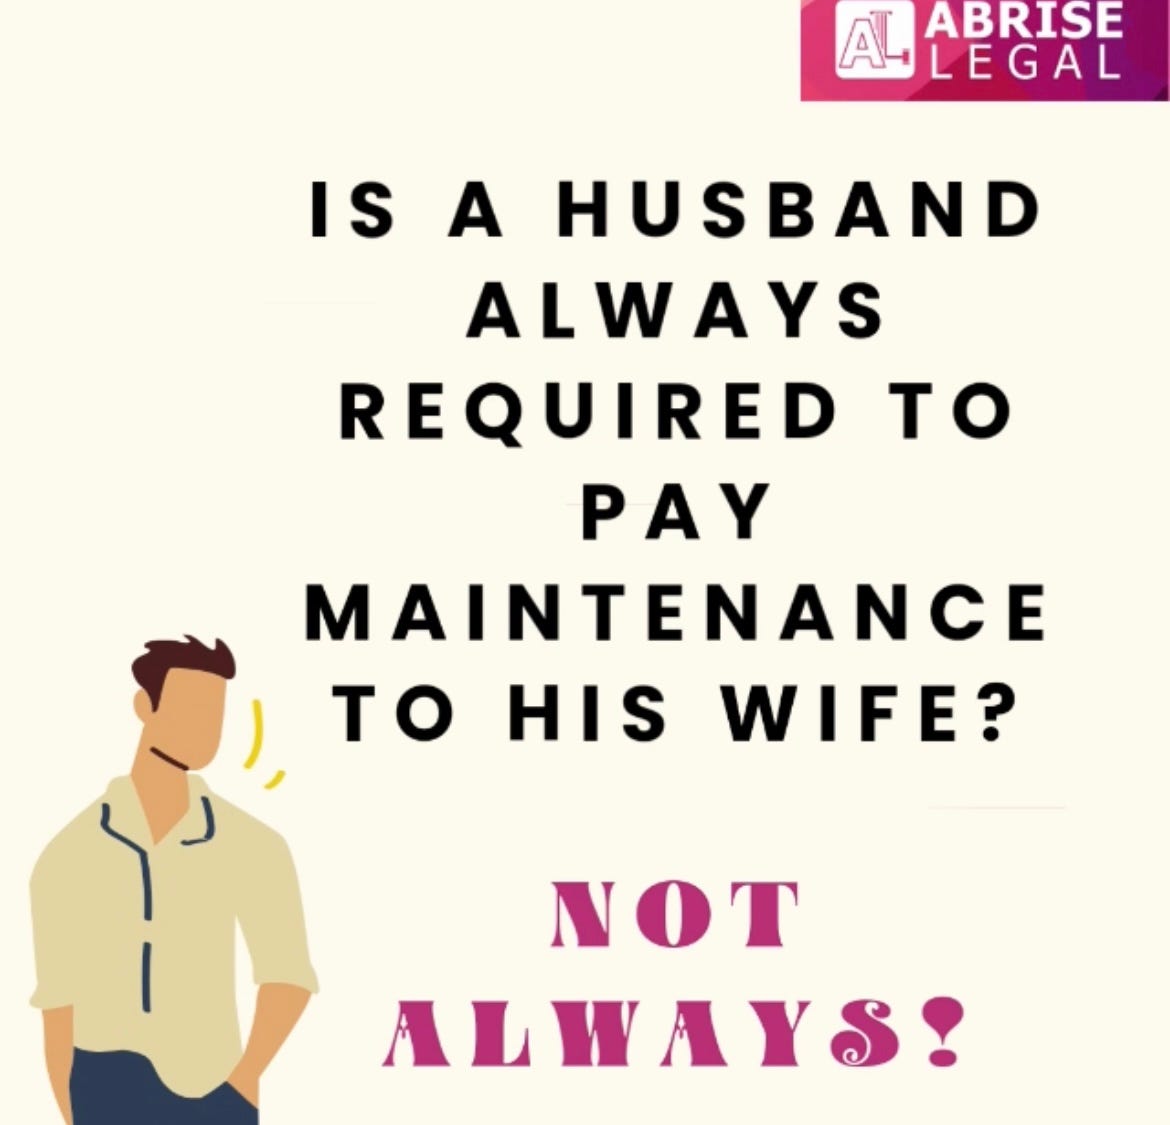 Is a husband always required to pay maintenance to his wife? Not always!